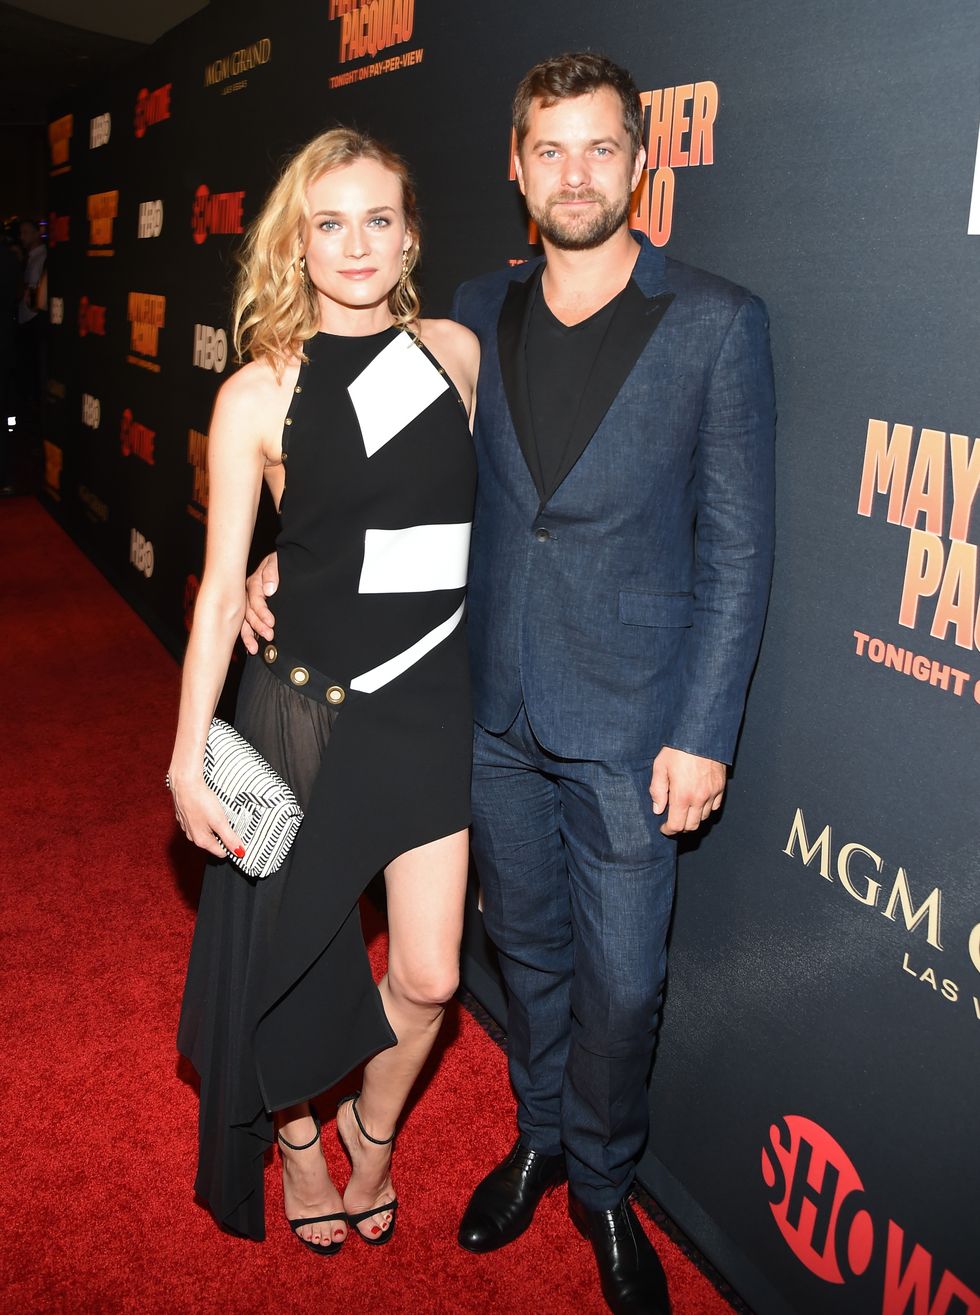 Diane Kruger and Joshua Jackson on the red caroet at the Floyd Mayweather vs Manny Pacquiao fight